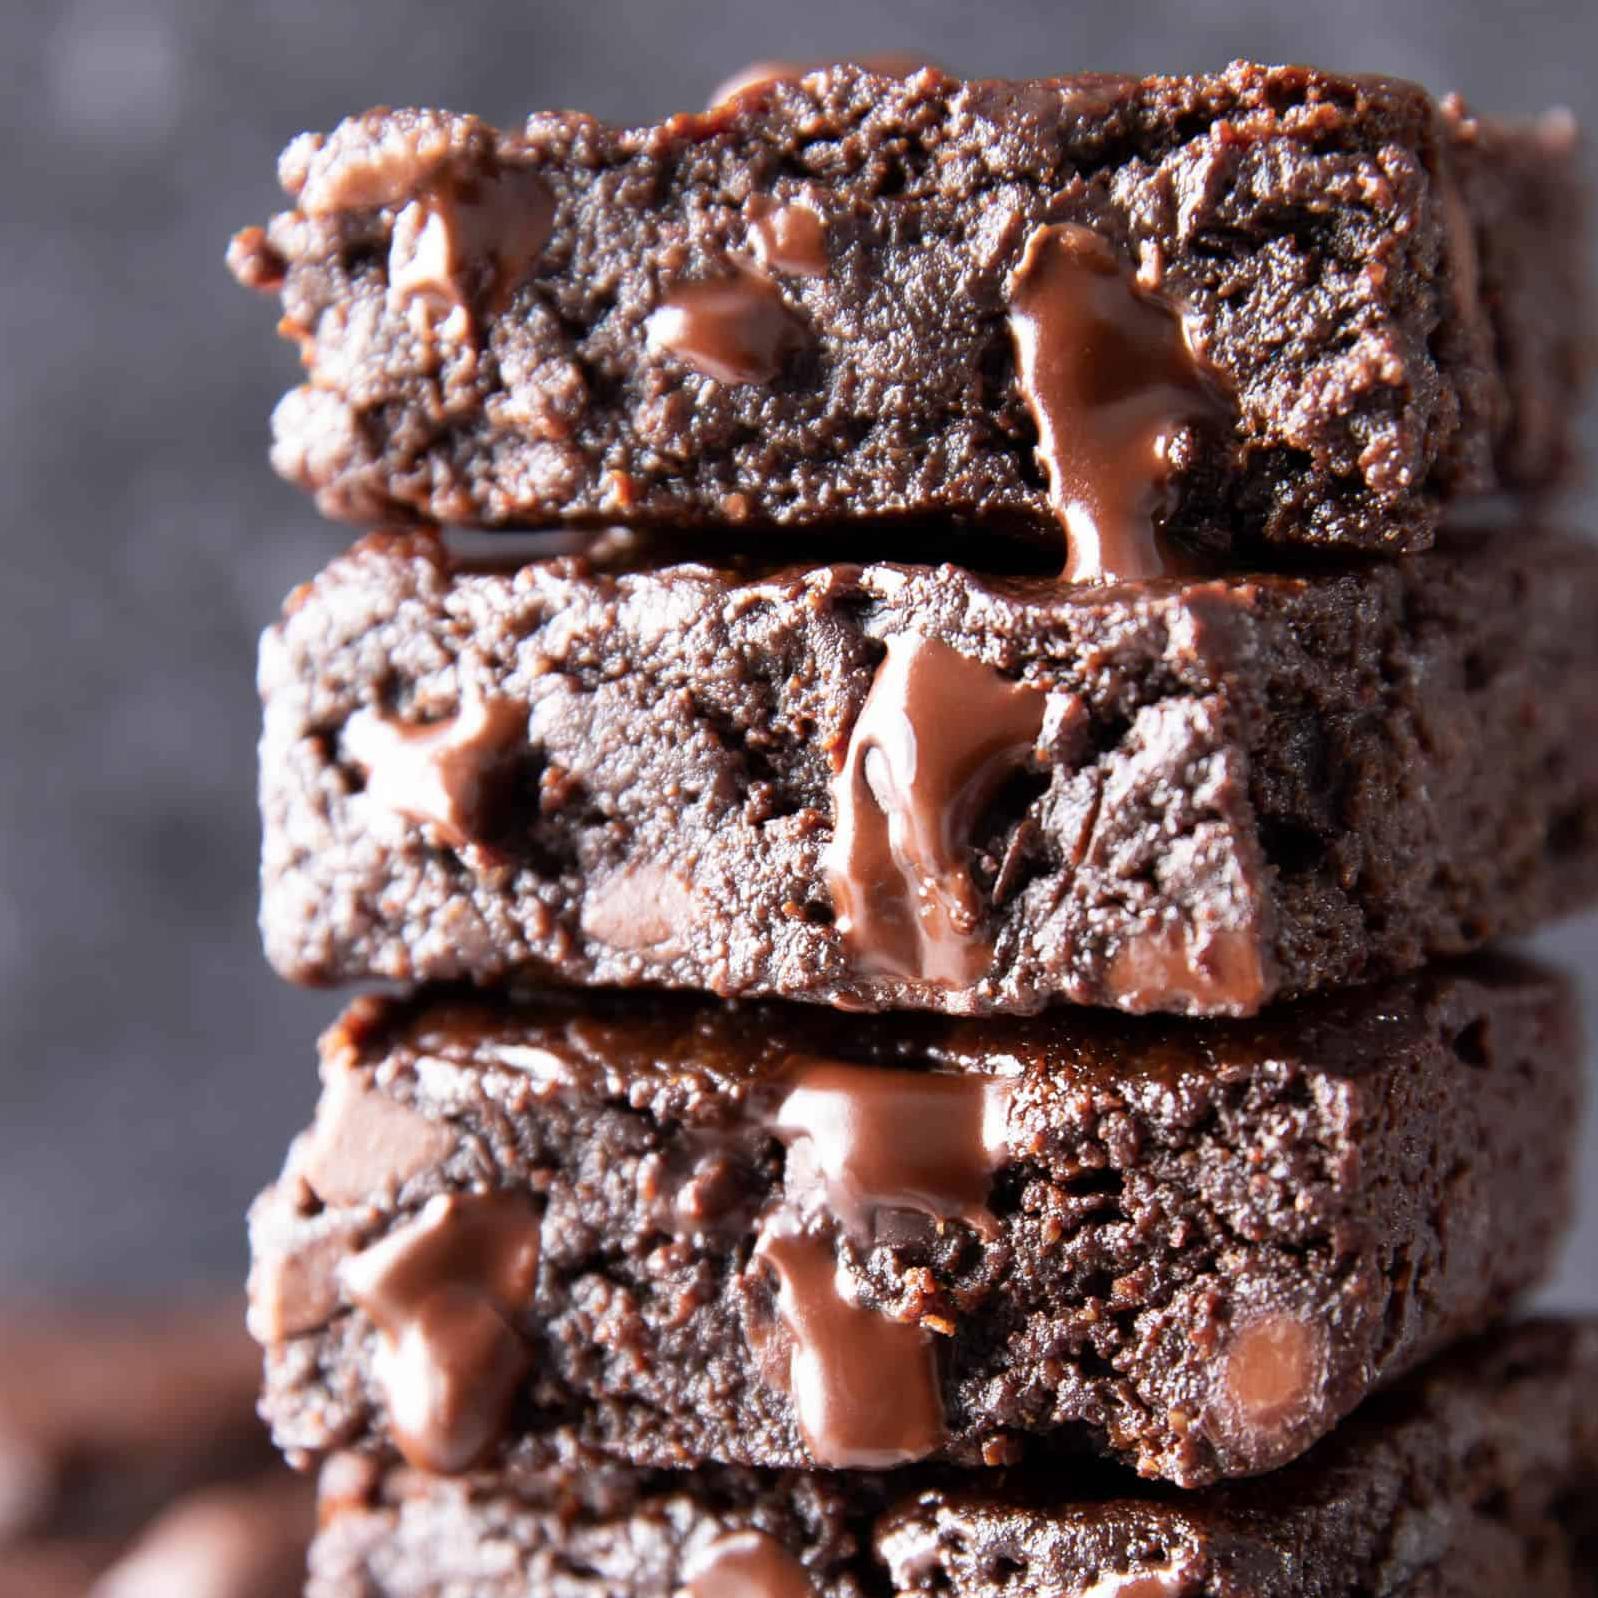  These brownies are so delicious, you won't even miss the butter or flour.